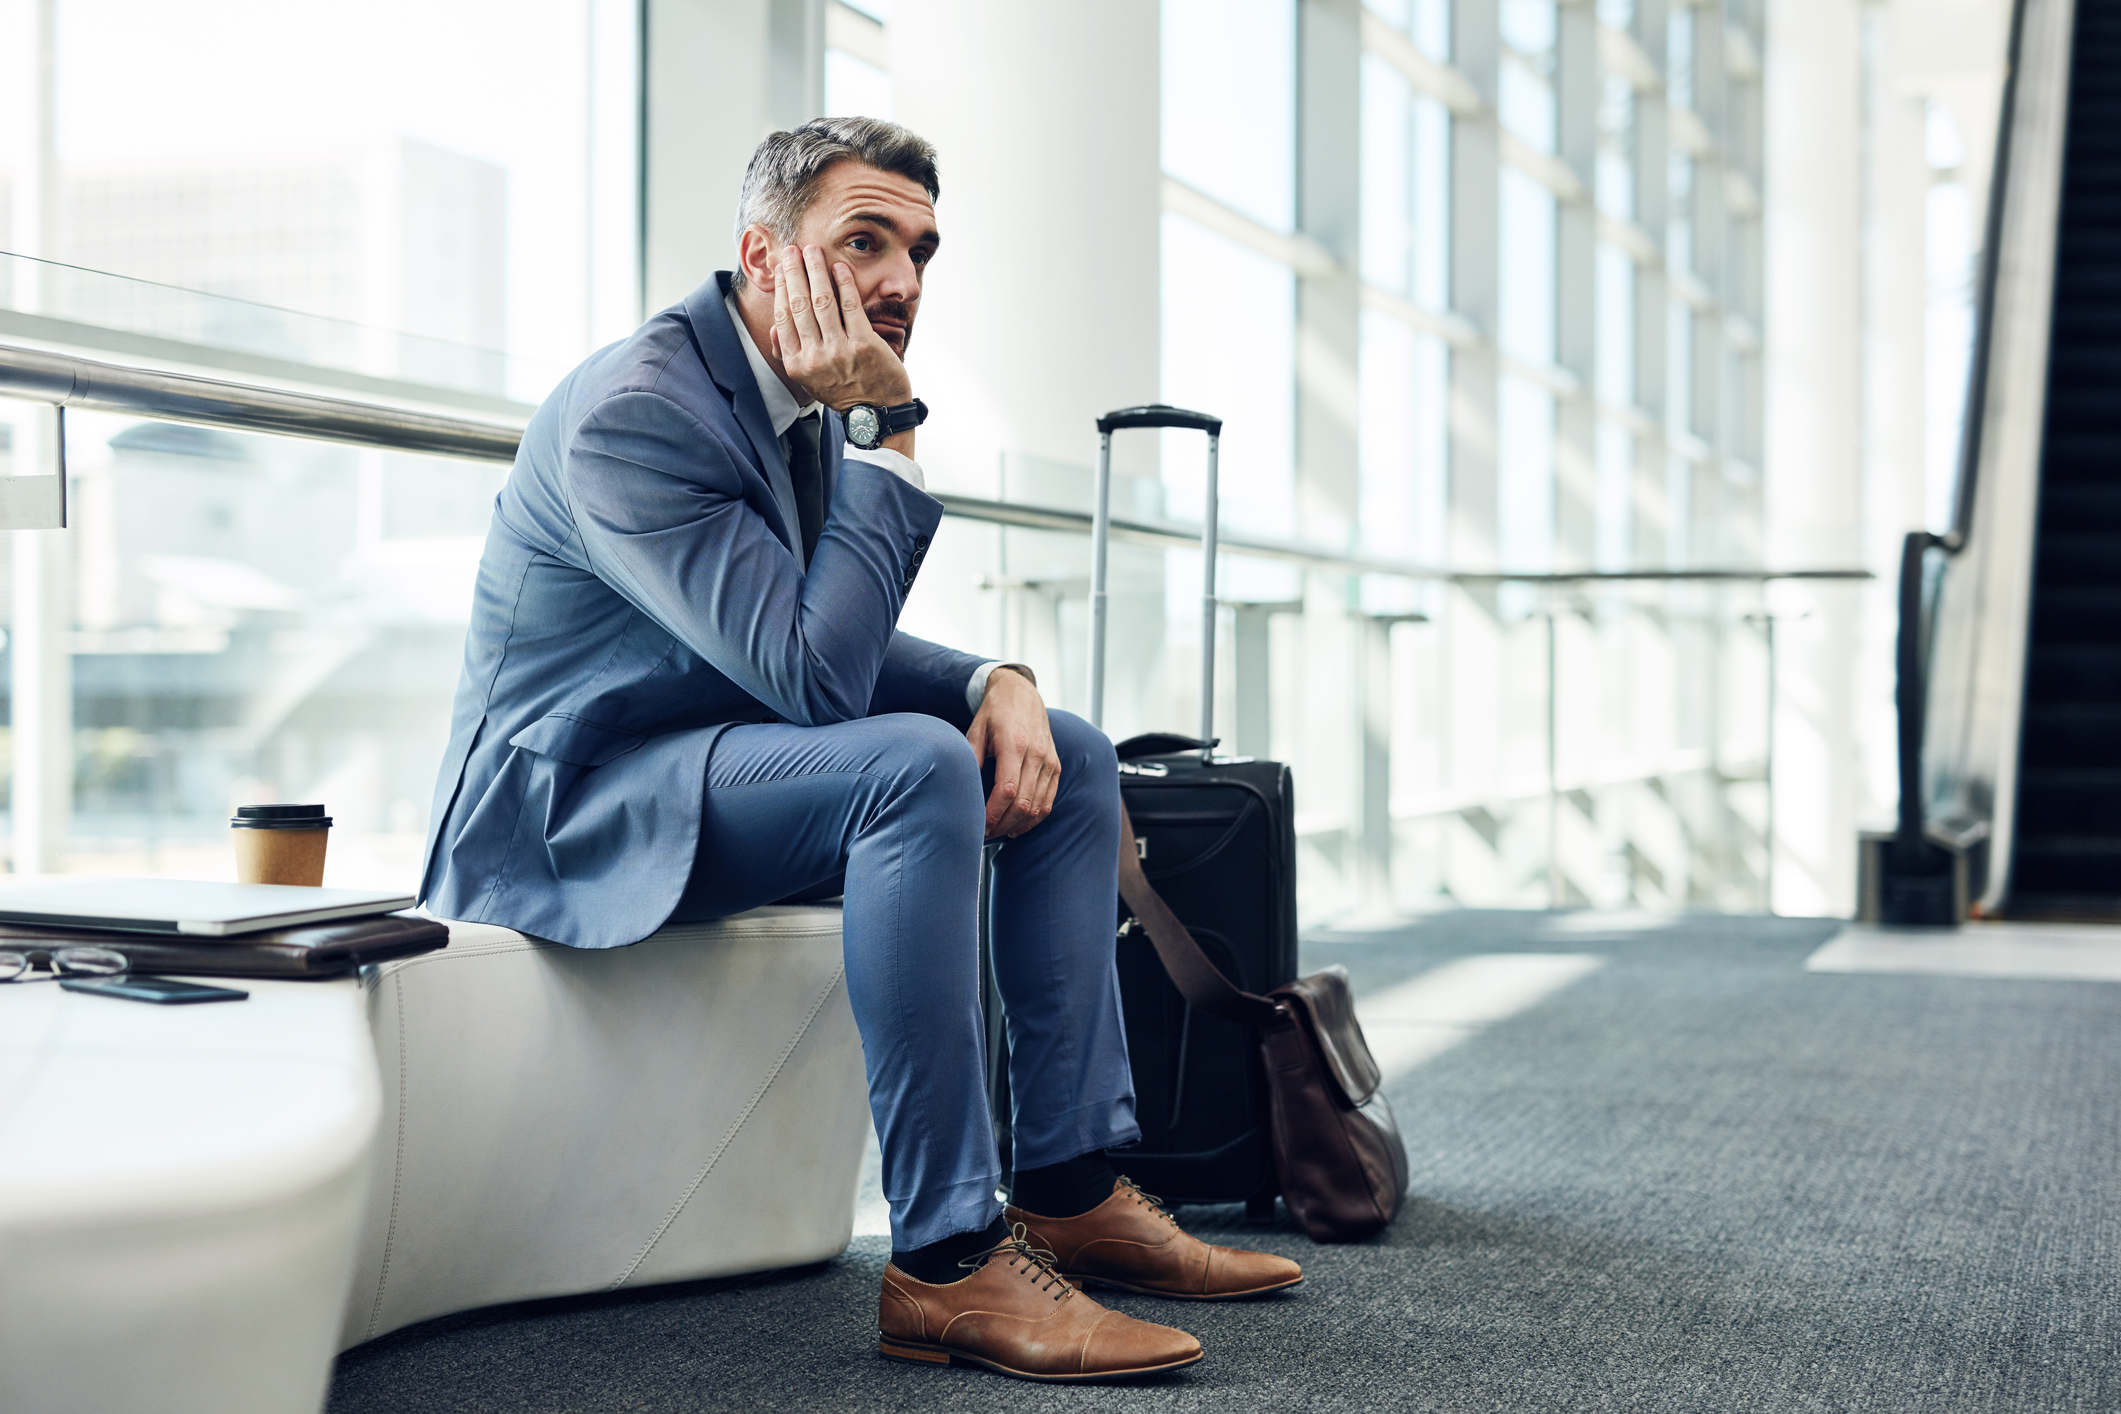 7 Mistakes Business Travelers Make and How To Avoid Them